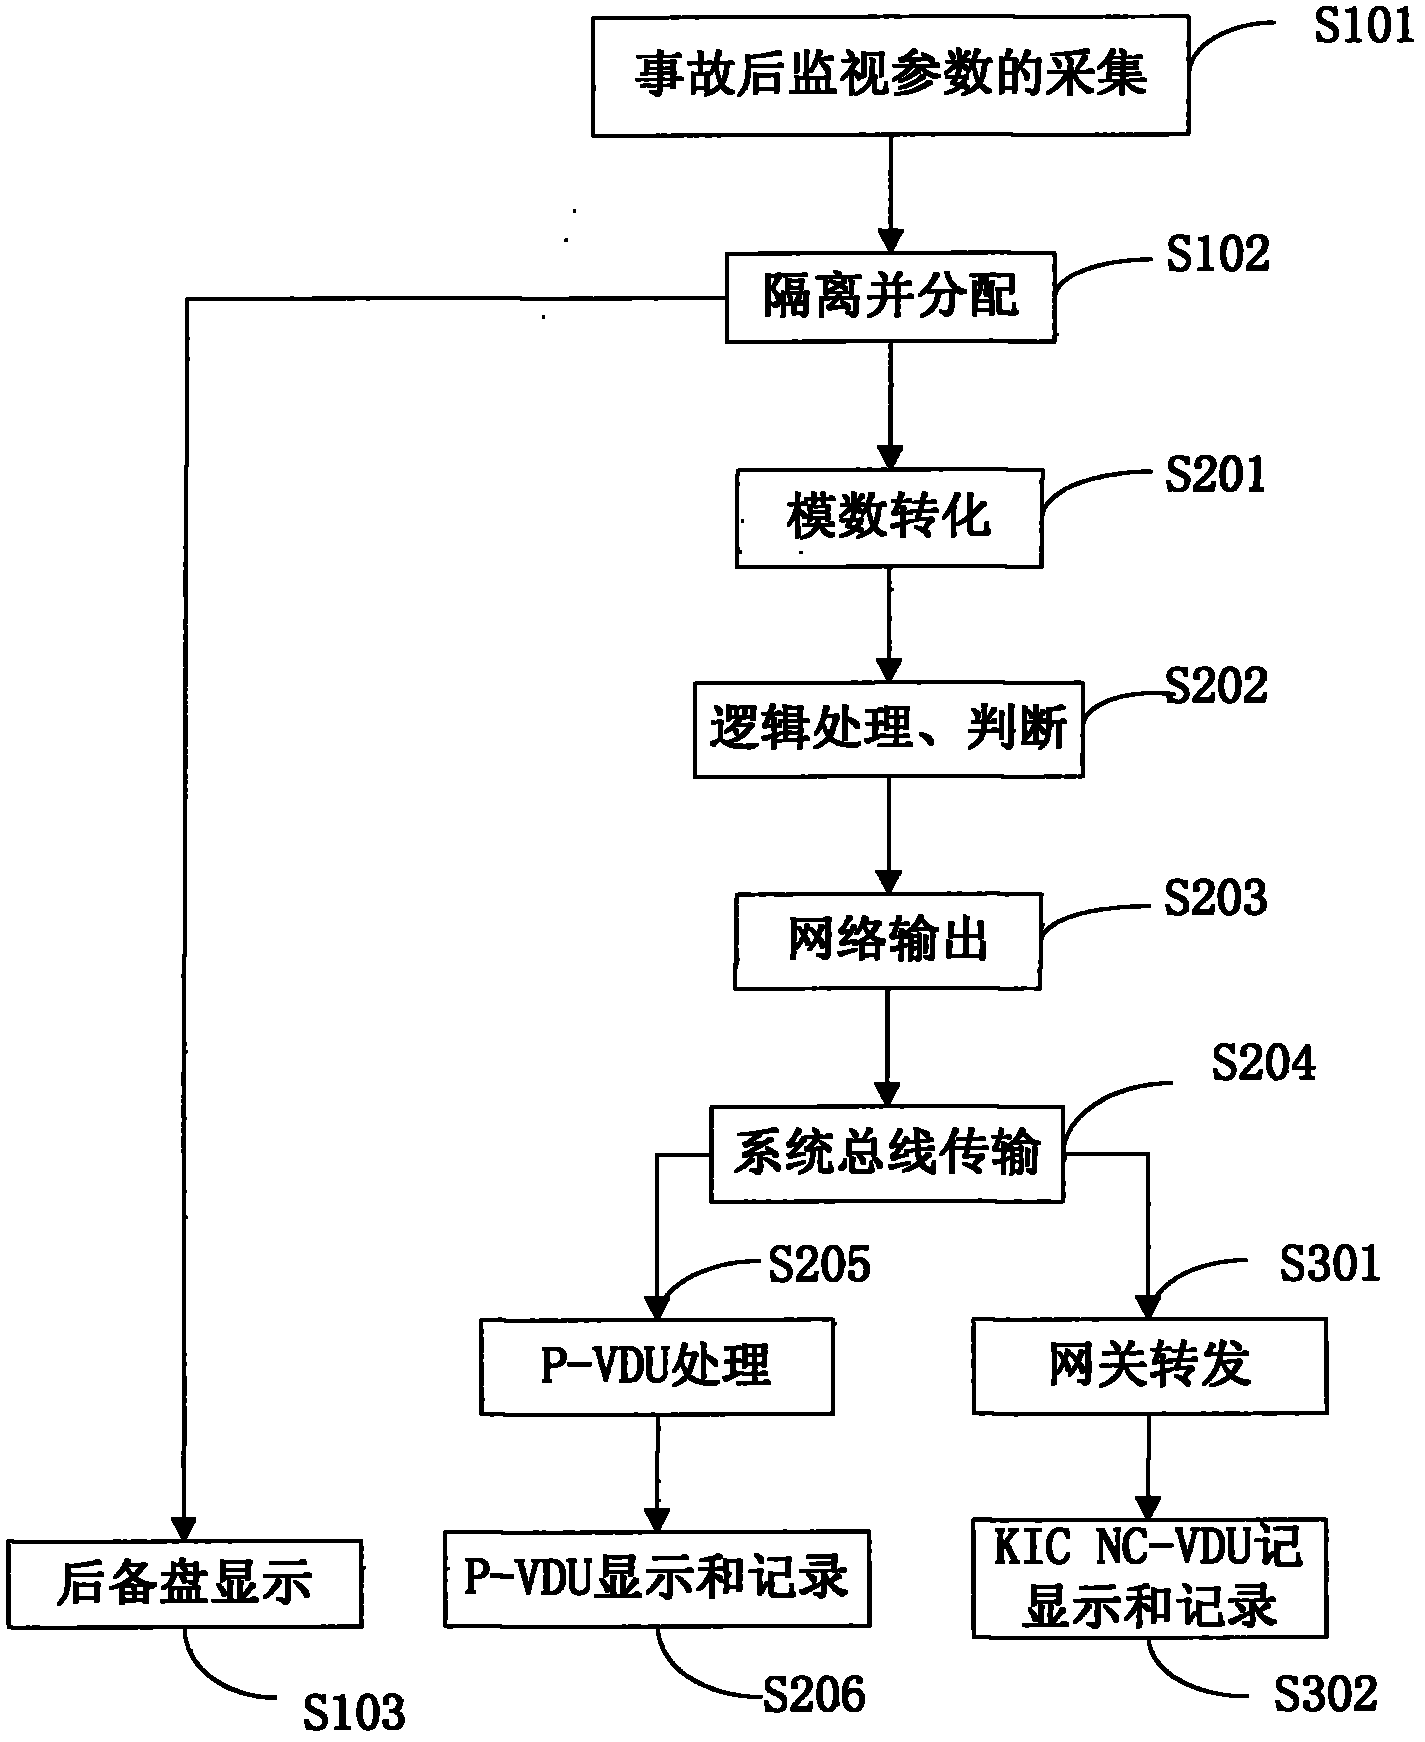 Method and system for displaying monitoring parameters after nuclear power station accident